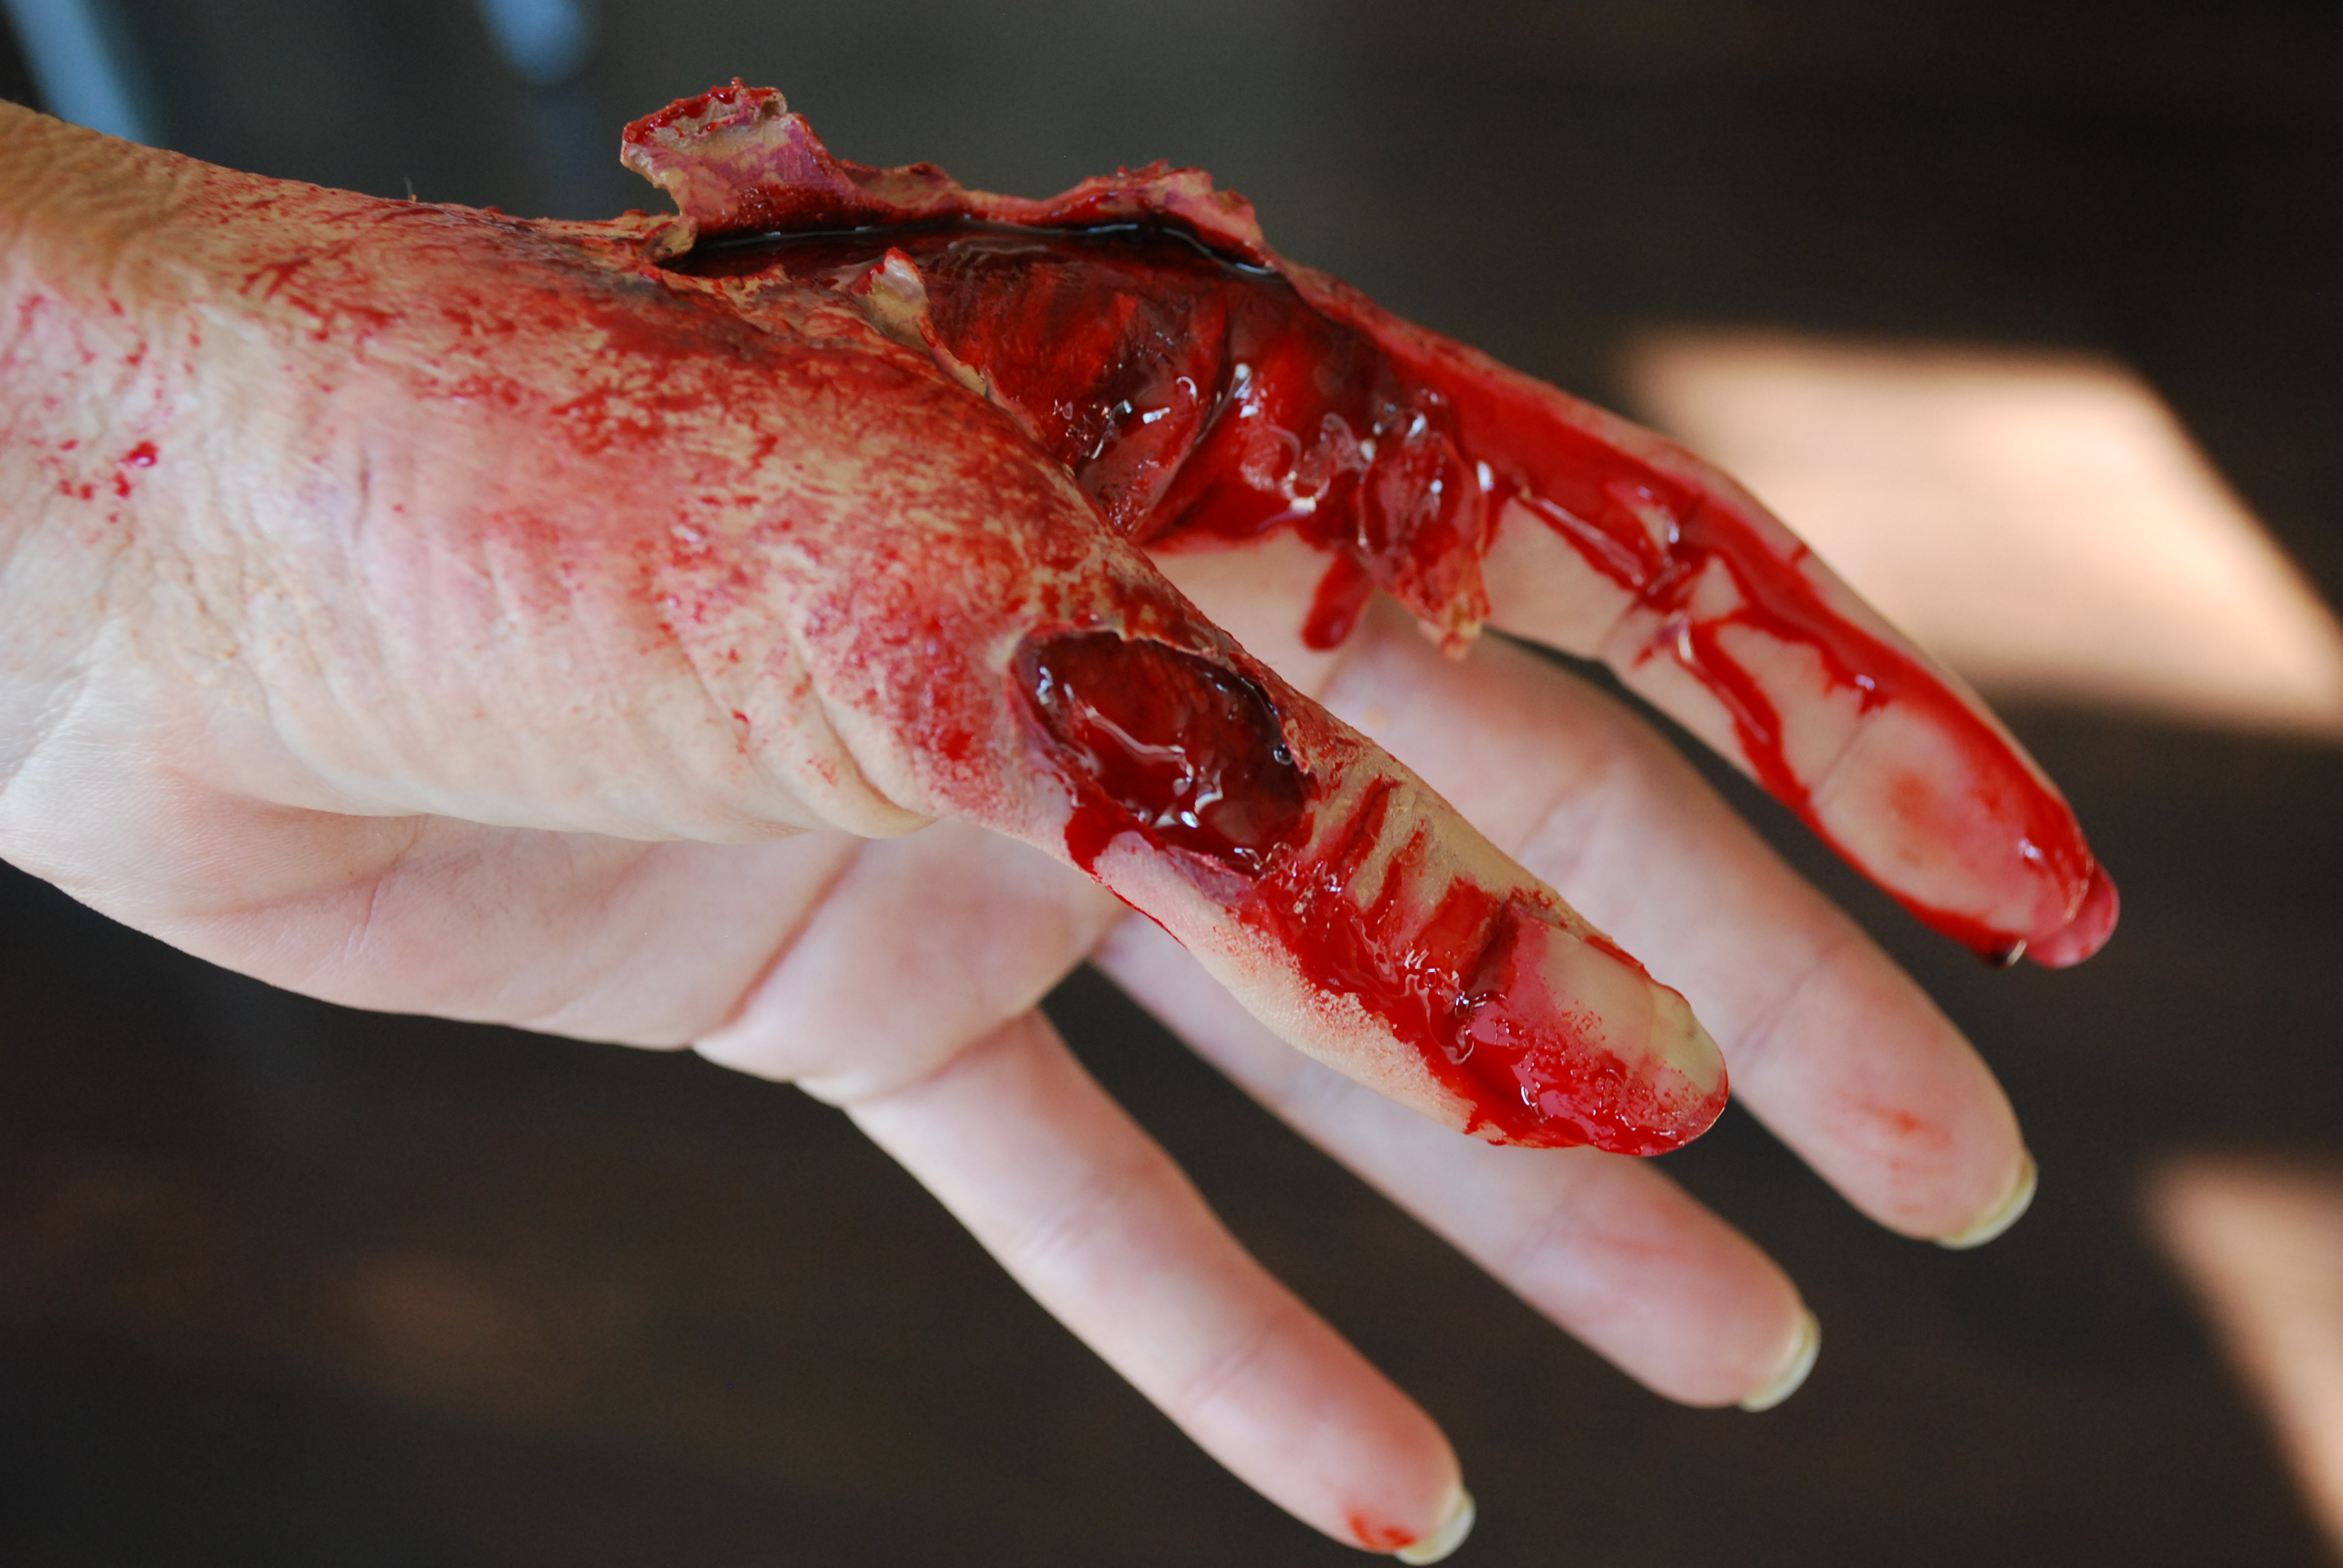 injured hand prosthetic by Loni Hale.